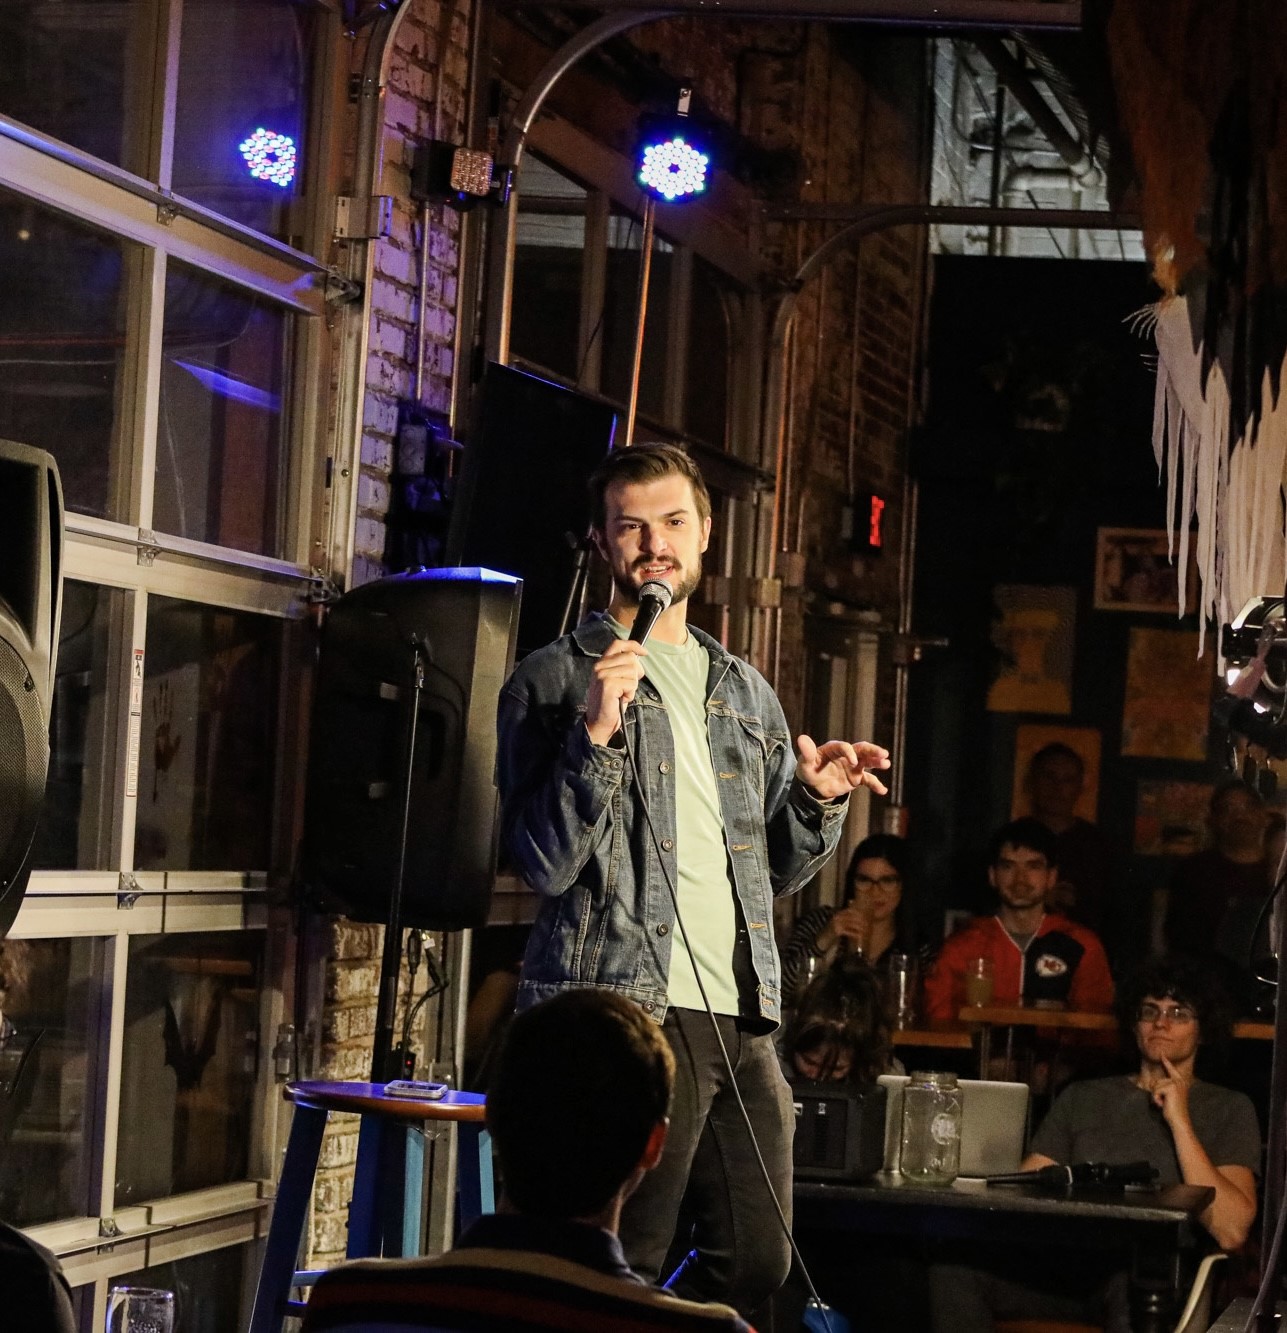 Tyler Ross Fri. 9:30 Show Funny Stop Comedy Club on mai 19, 21:30@Funny Stop Comedy Club - Achetez des billets et obtenez des informations surFunny Stop funnystop.online